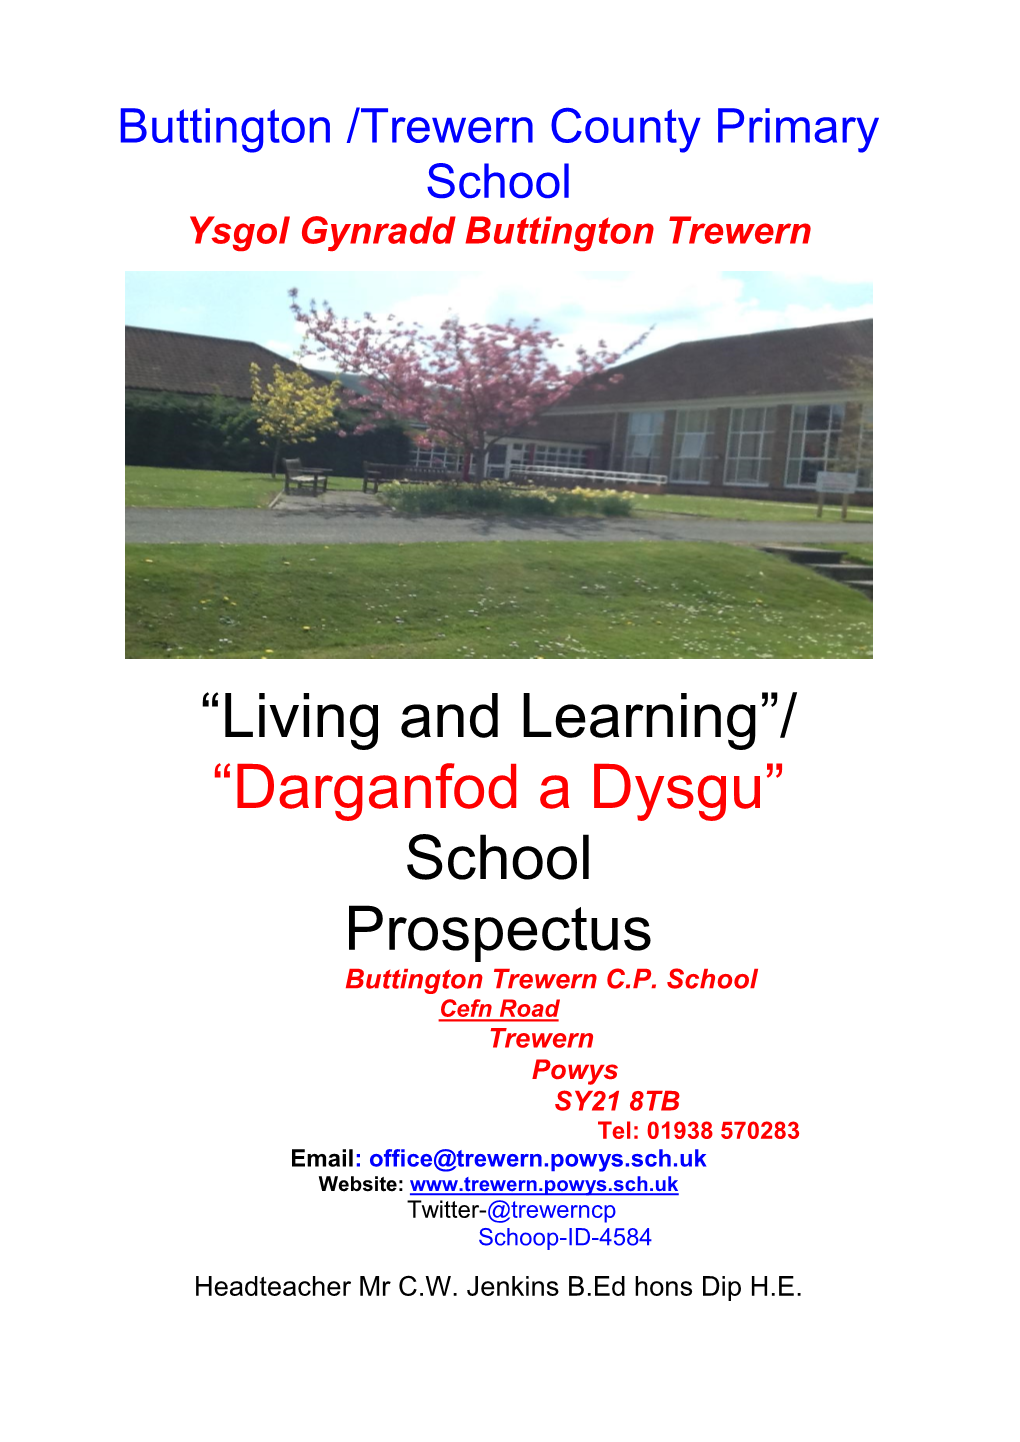 “Living and Learning”/ “Darganfod a Dysgu” School Prospectus